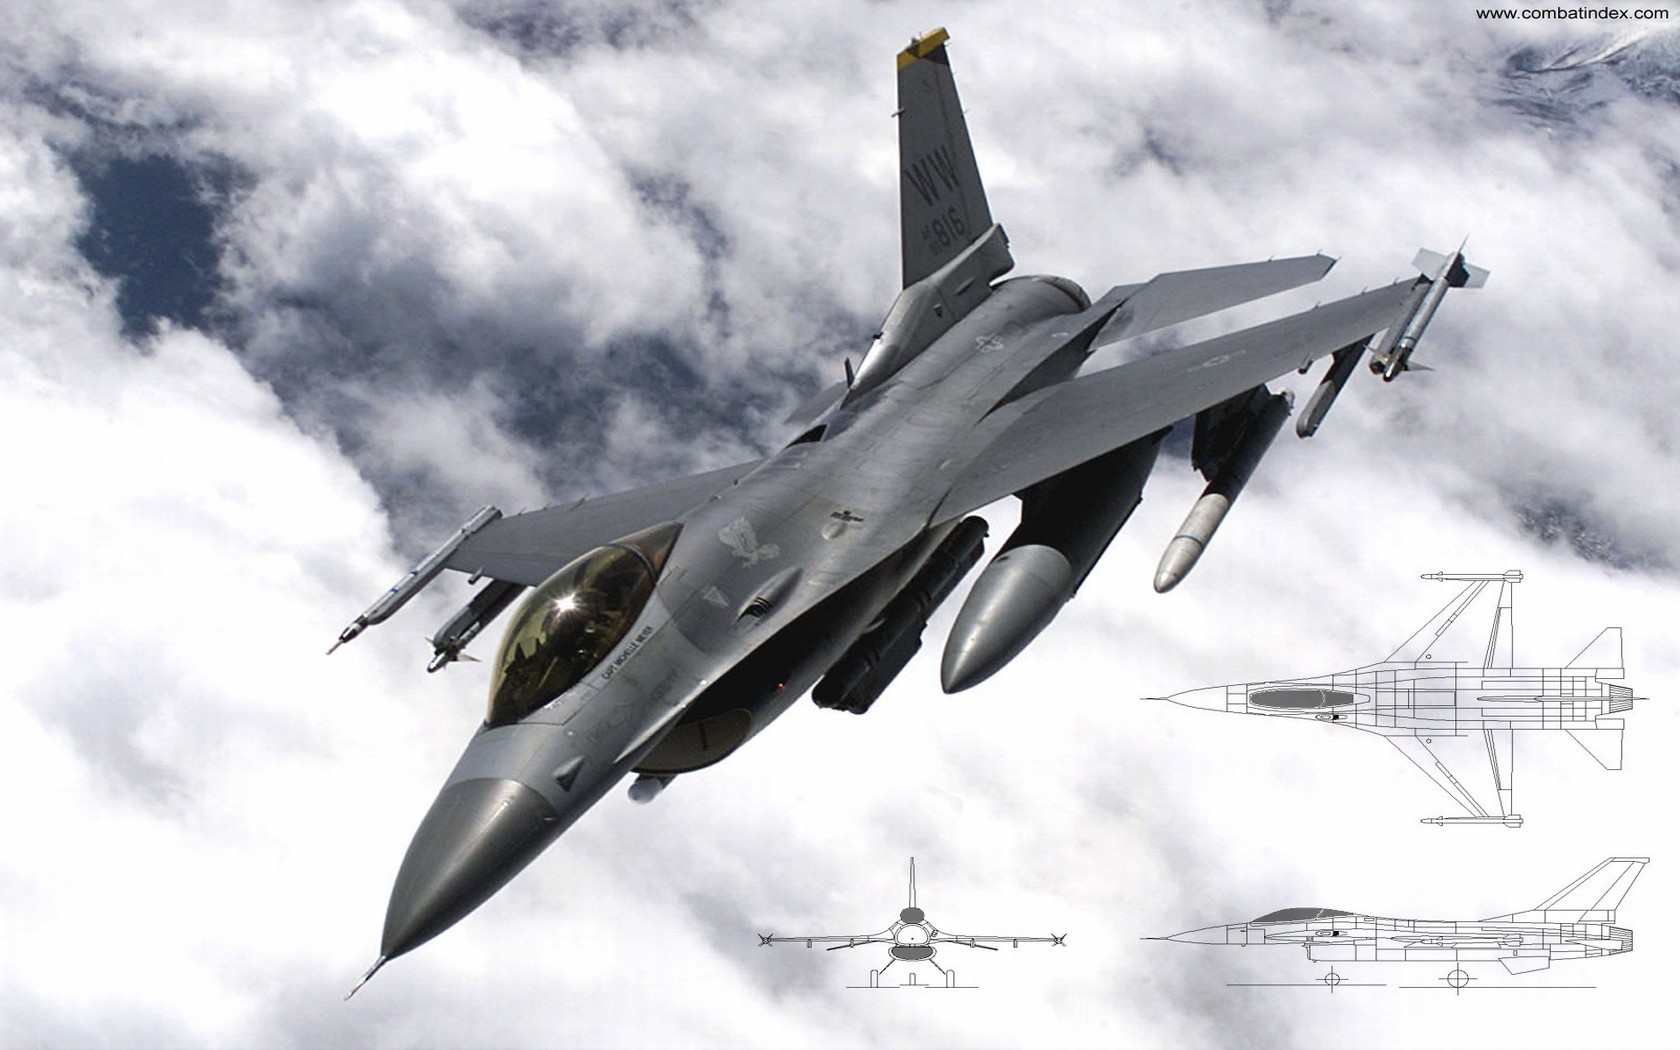 General 1680x1050 aircraft military aircraft vehicle military General Dynamics F-16 Fighting Falcon General Dynamics clouds sky American aircraft concept art flying watermarked